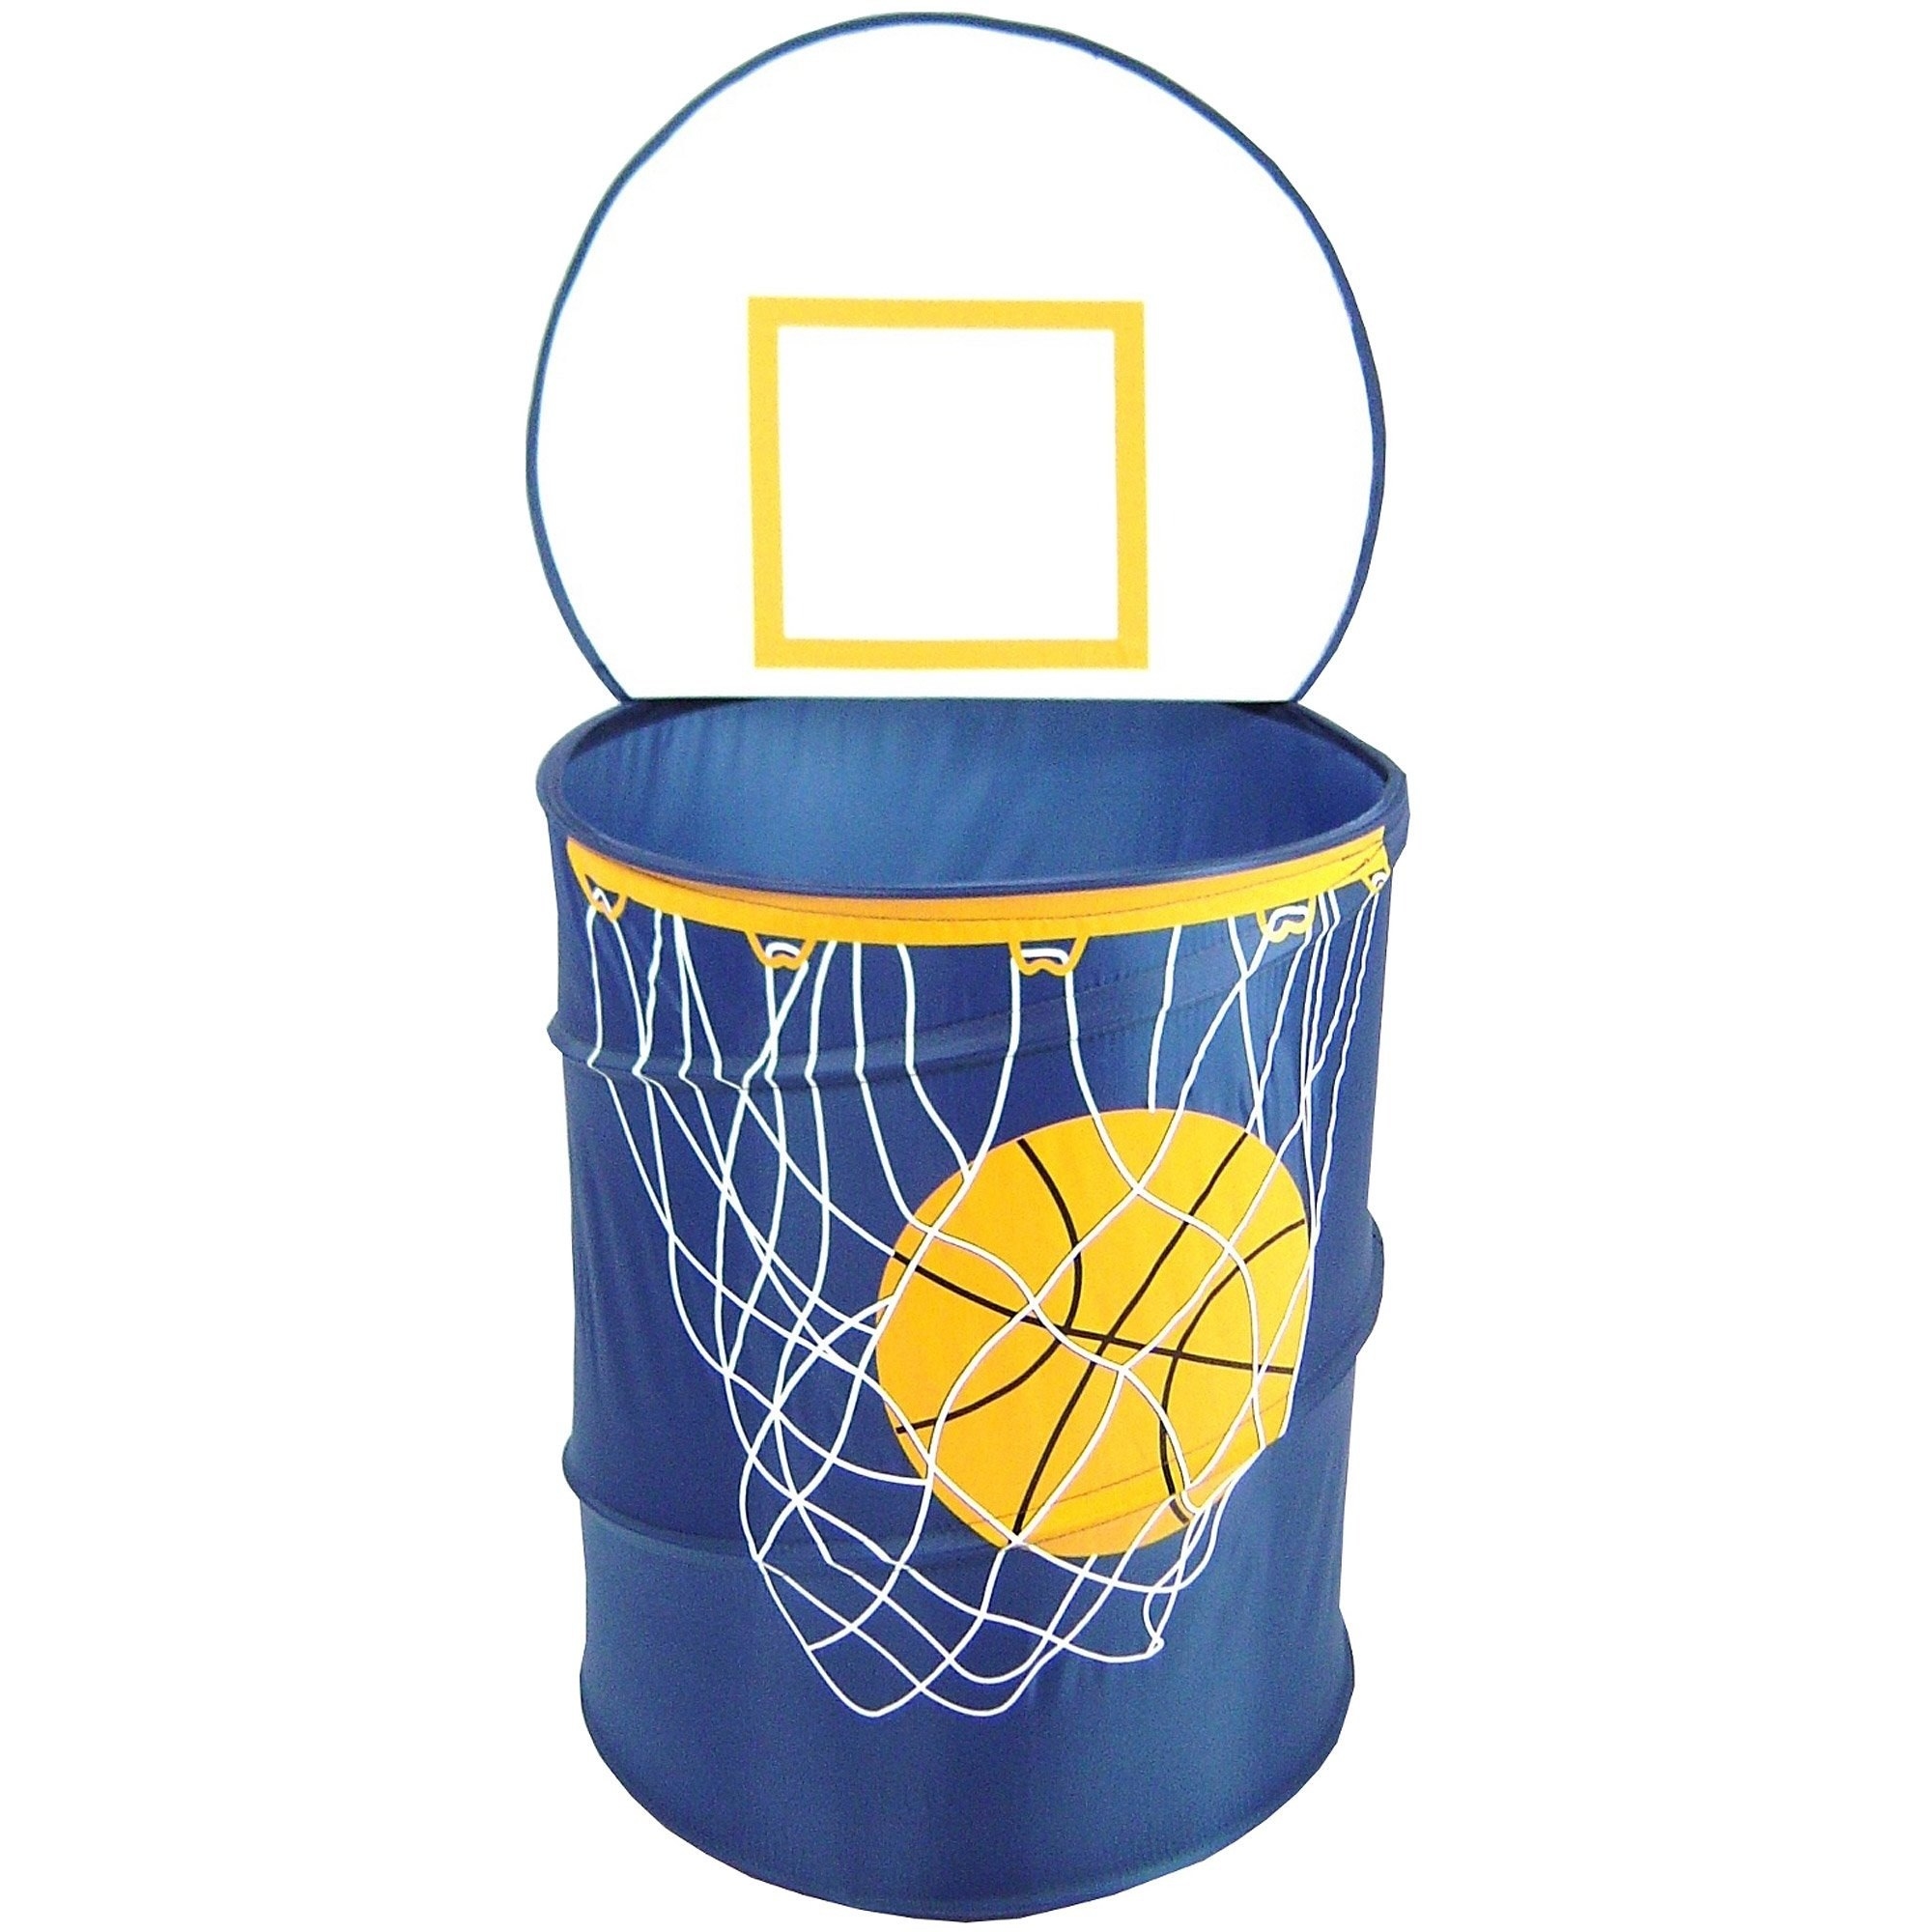 Clothes hamper with a backstop and basketball hoop image